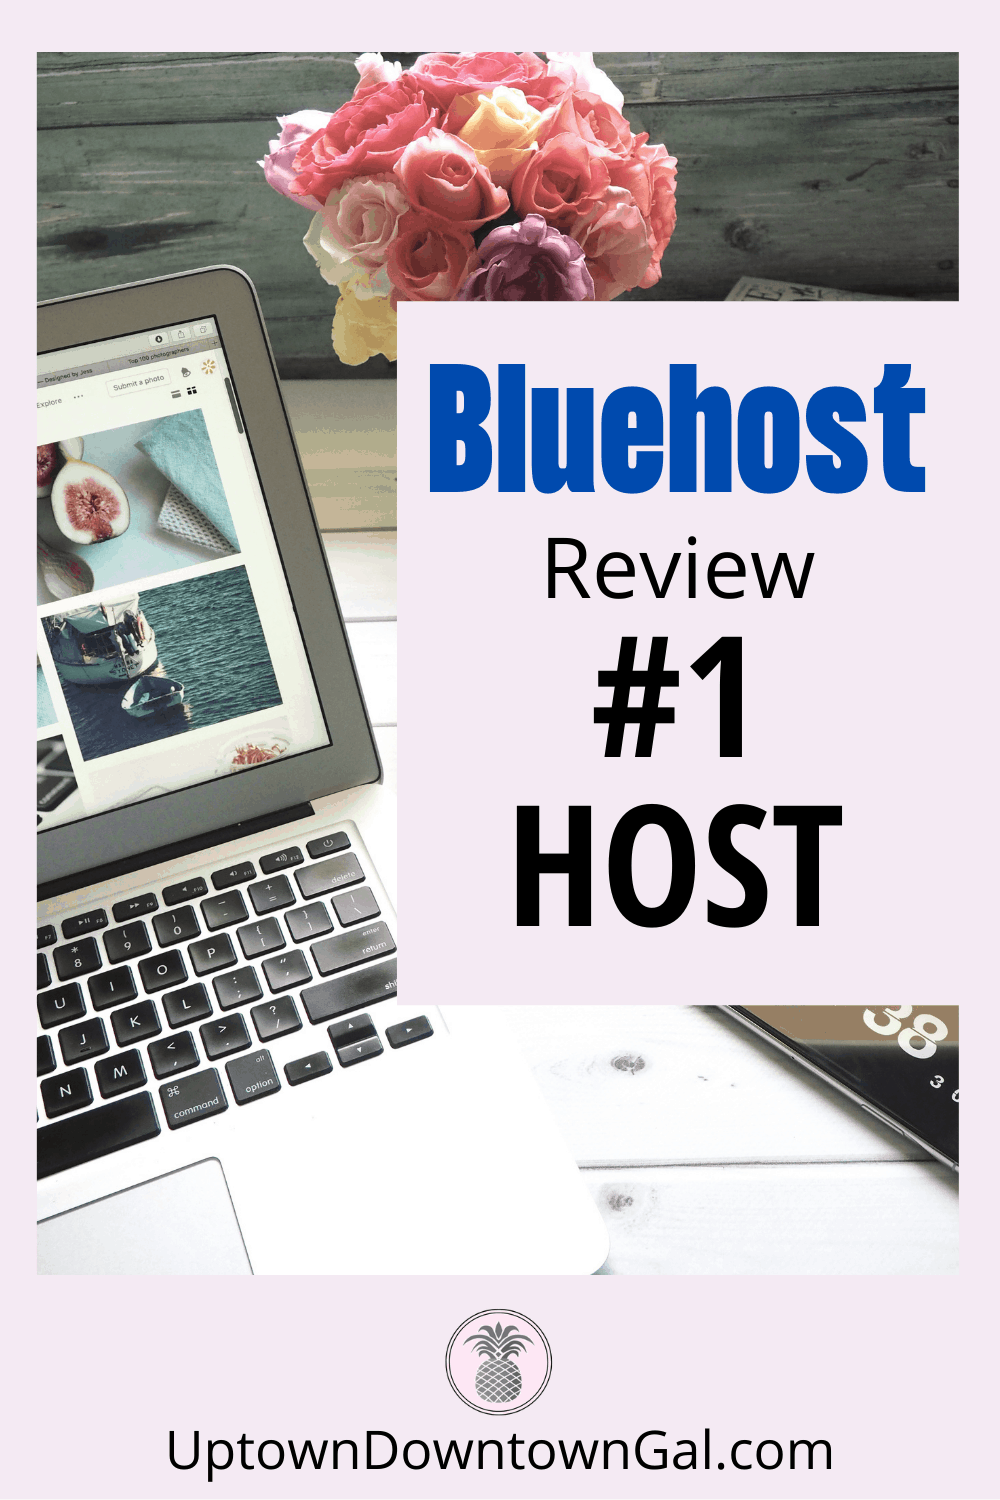 Bluehost Review - 1